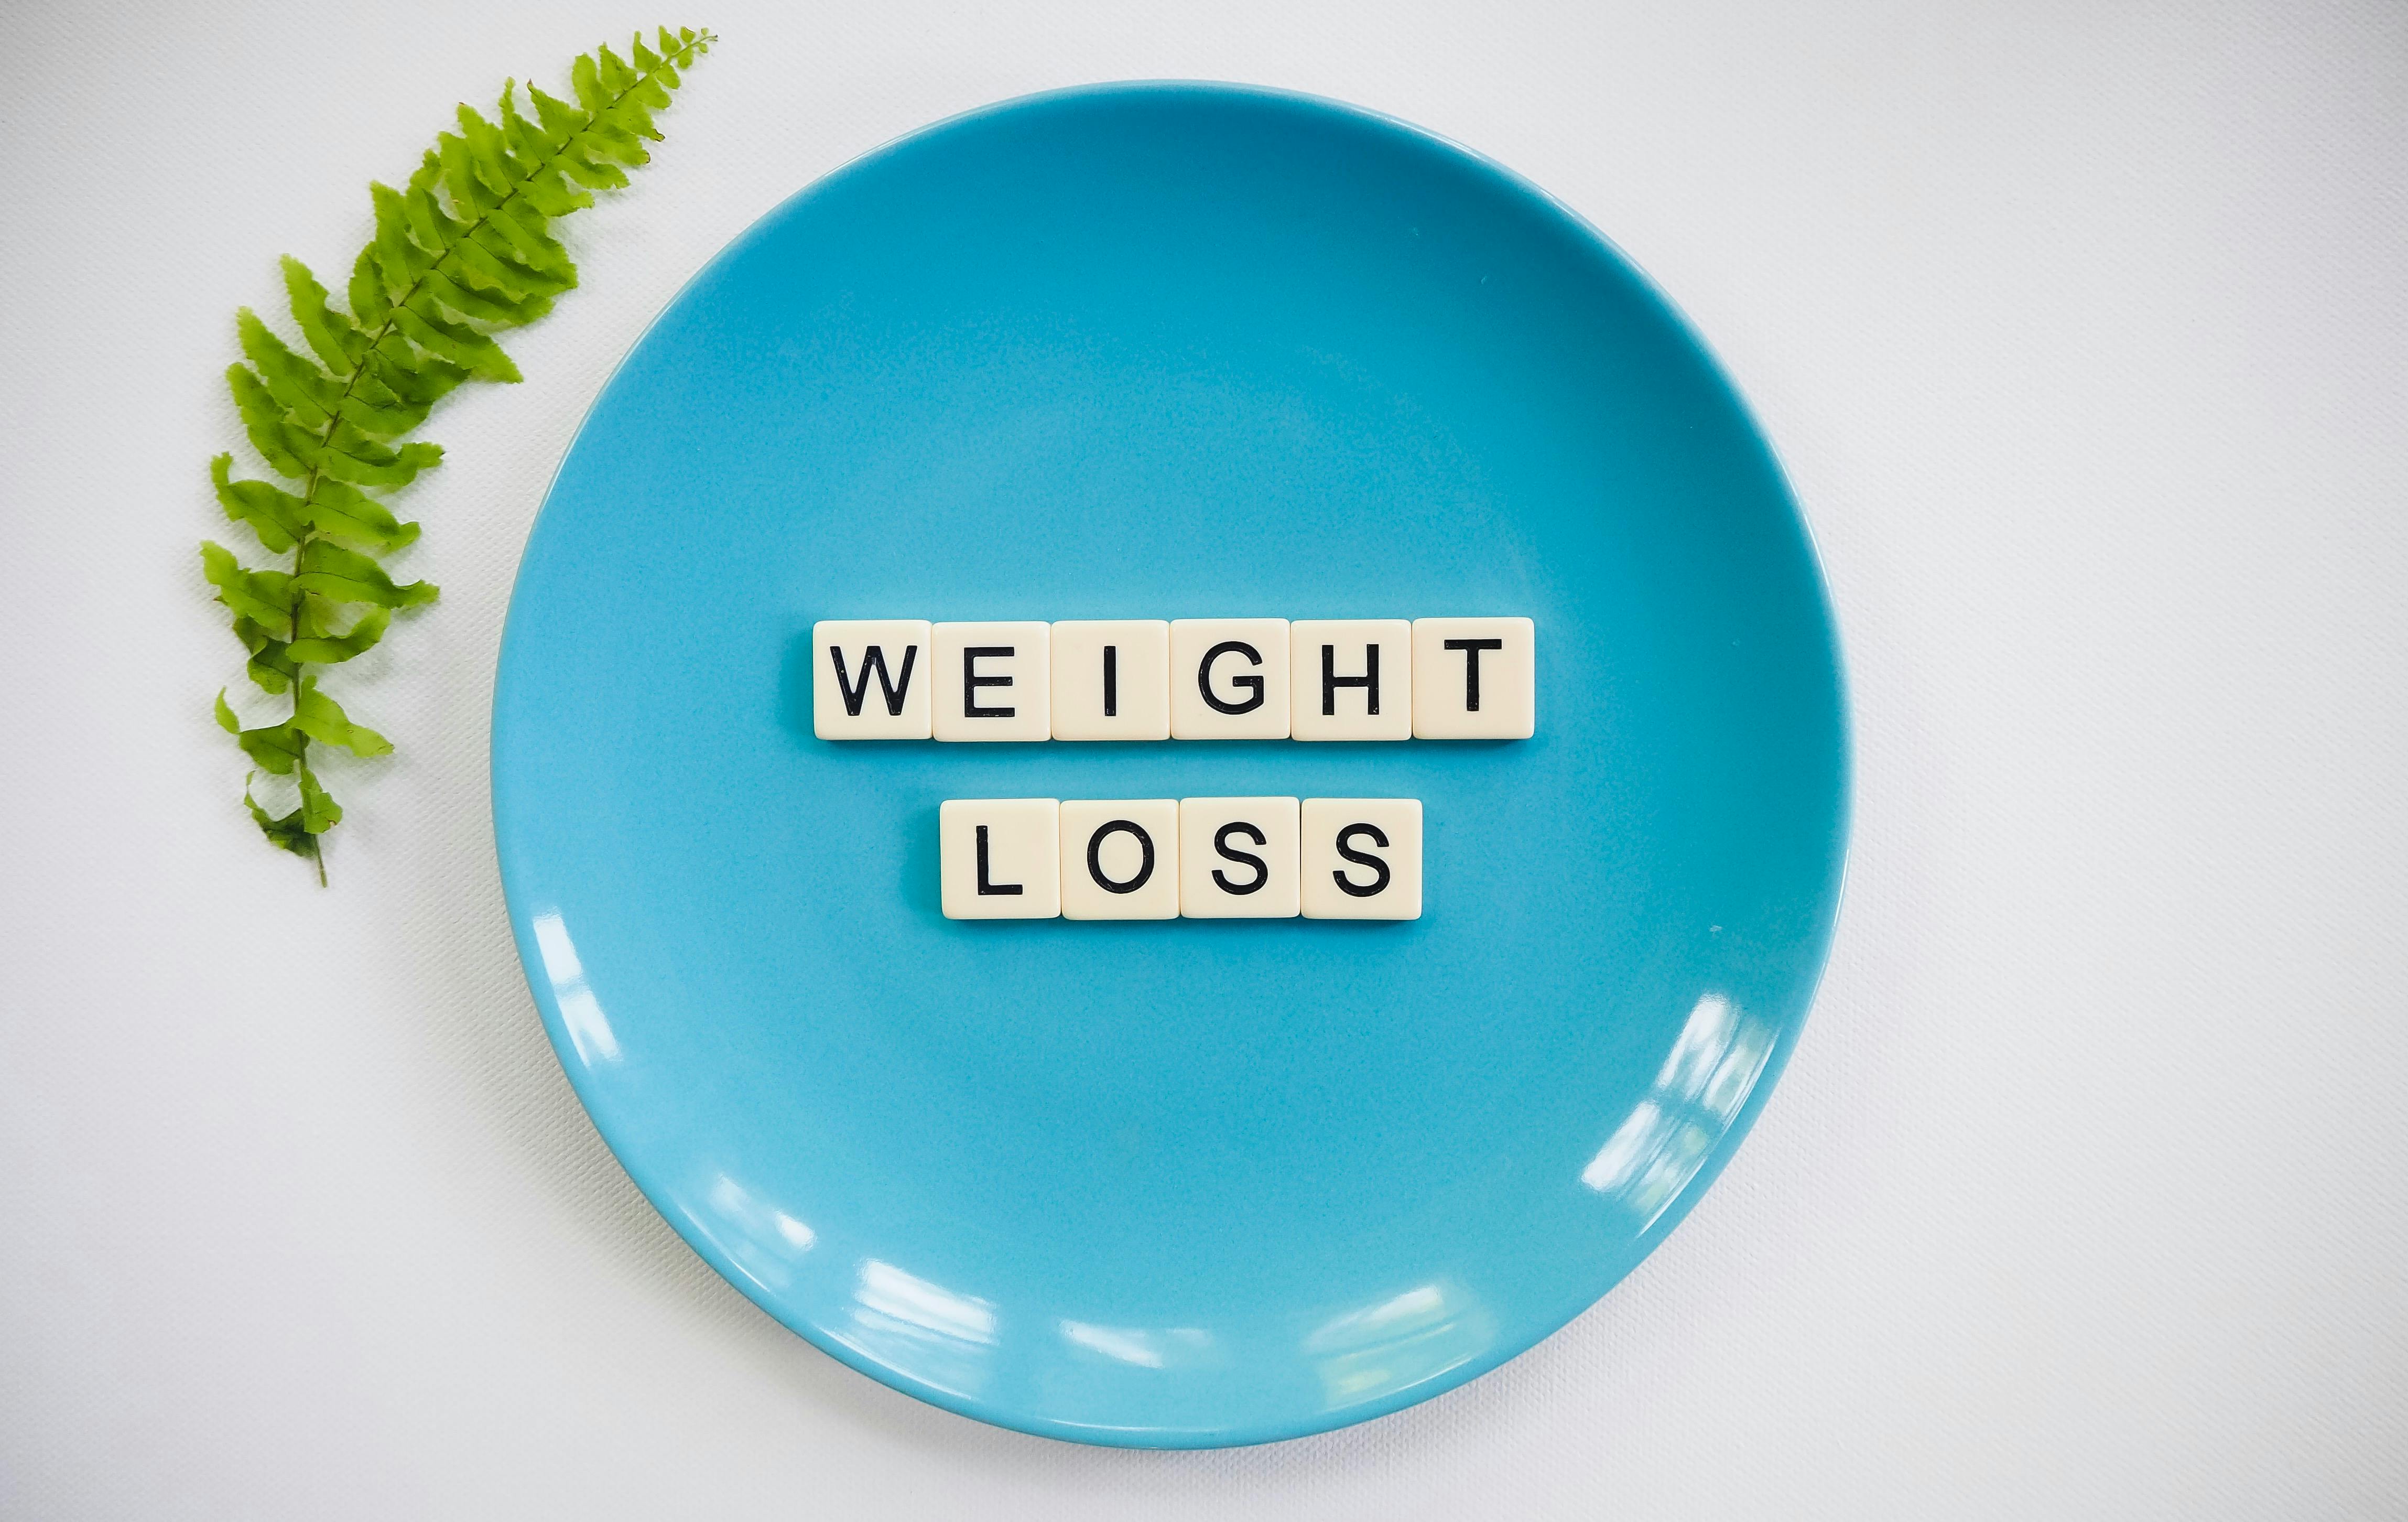 How can I get a weight loss consultation in St. Augustine for Ozempipc?